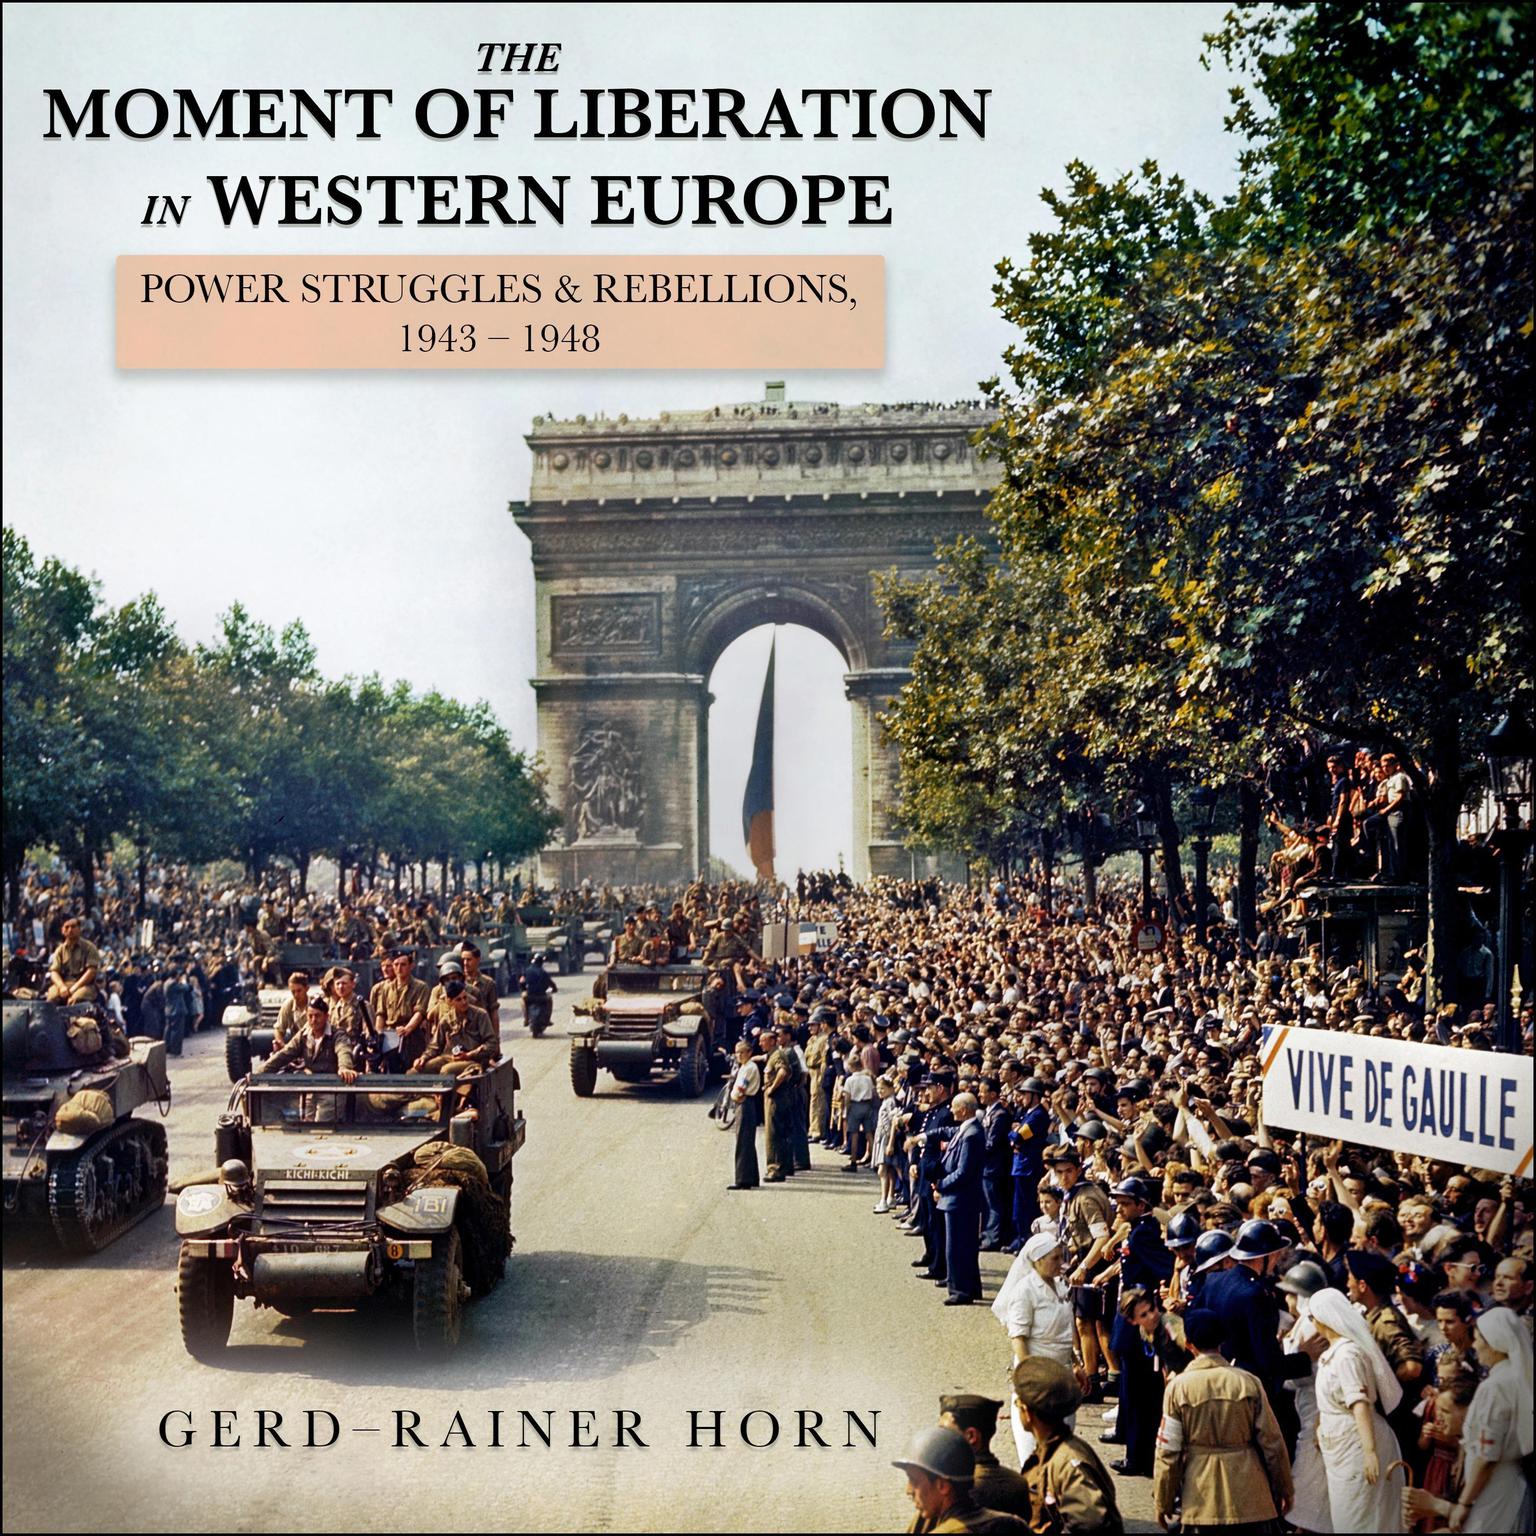 The Moment of Liberation in Western Europe: Power Struggles and Rebellions, 1943-1948 Audiobook, by Gerd-Rainer Horn